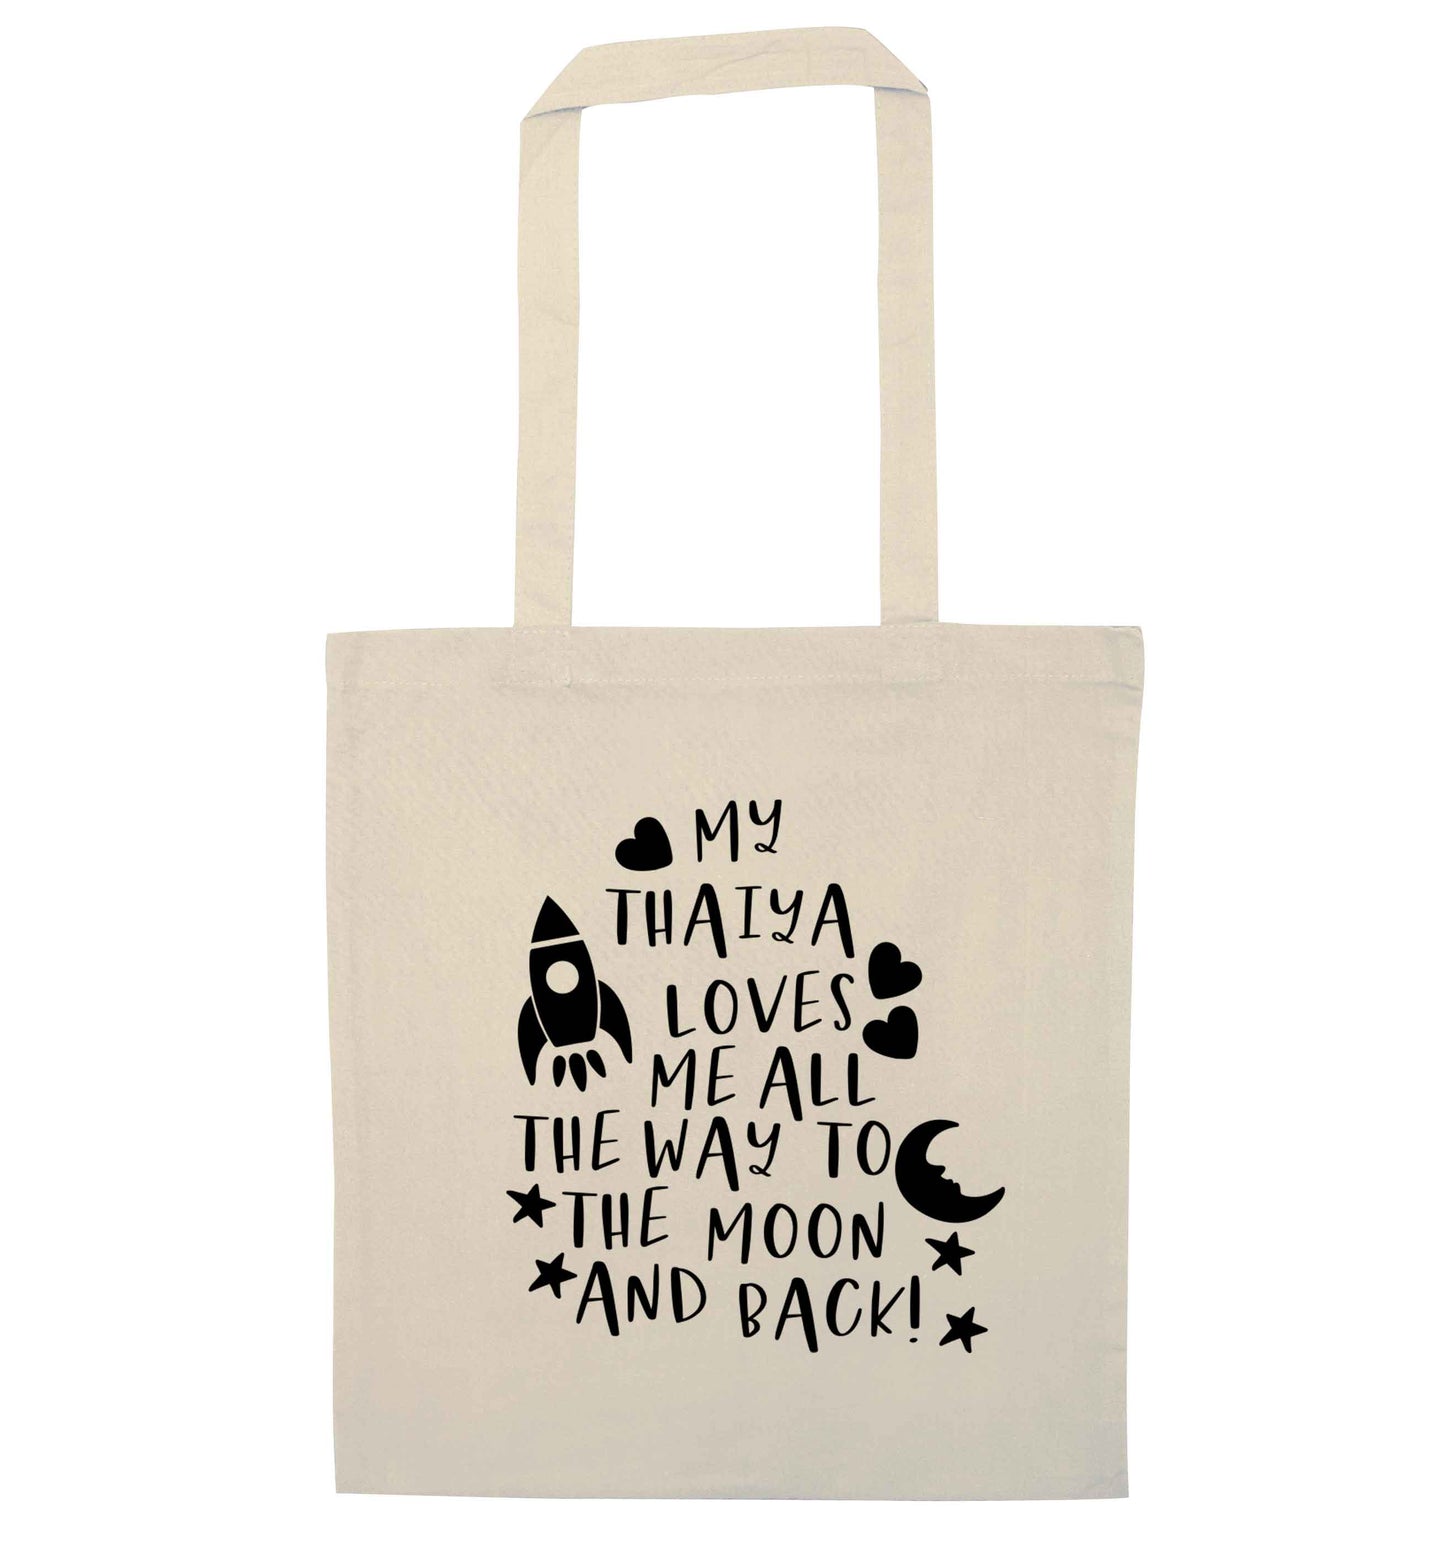 My thaiya loves me all the way to the moon and back natural tote bag